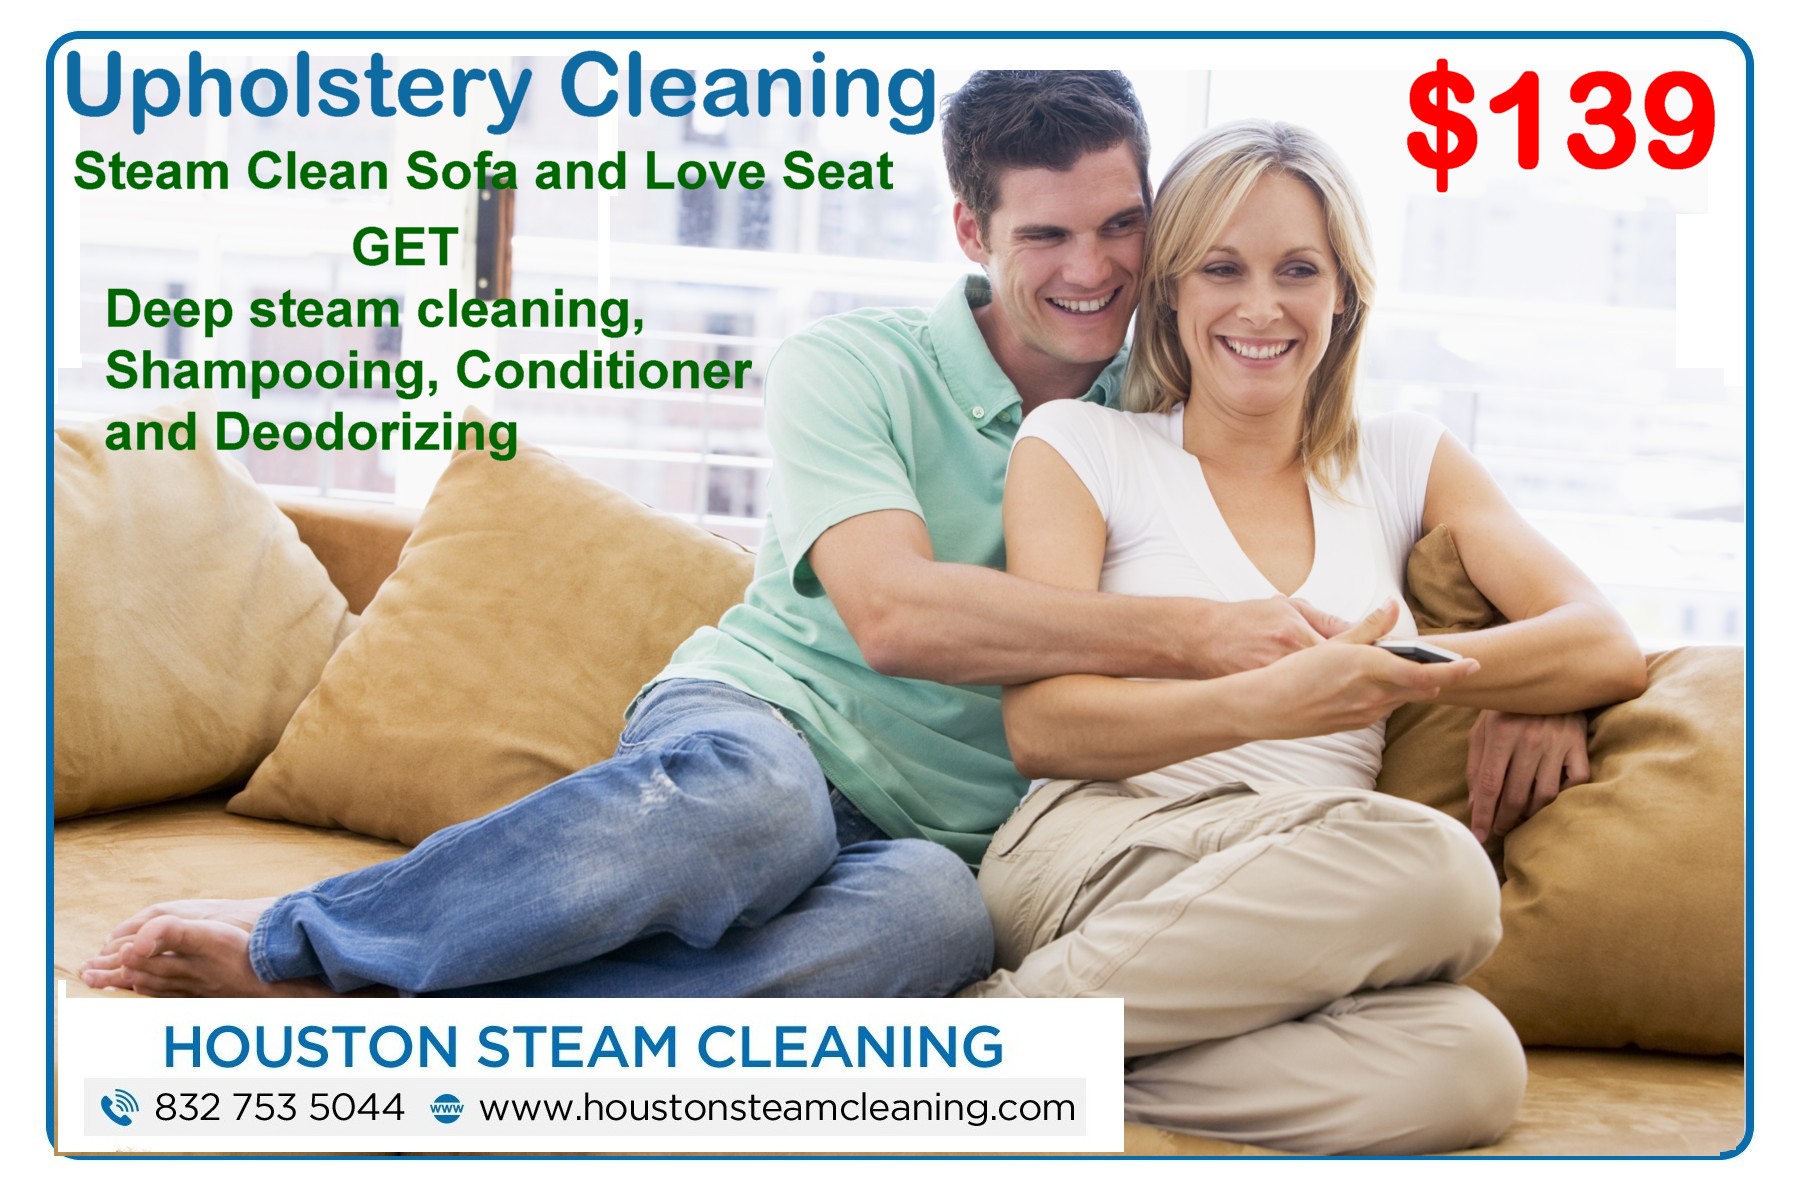 Only $139 for sofa and love seat upholstery cleaning